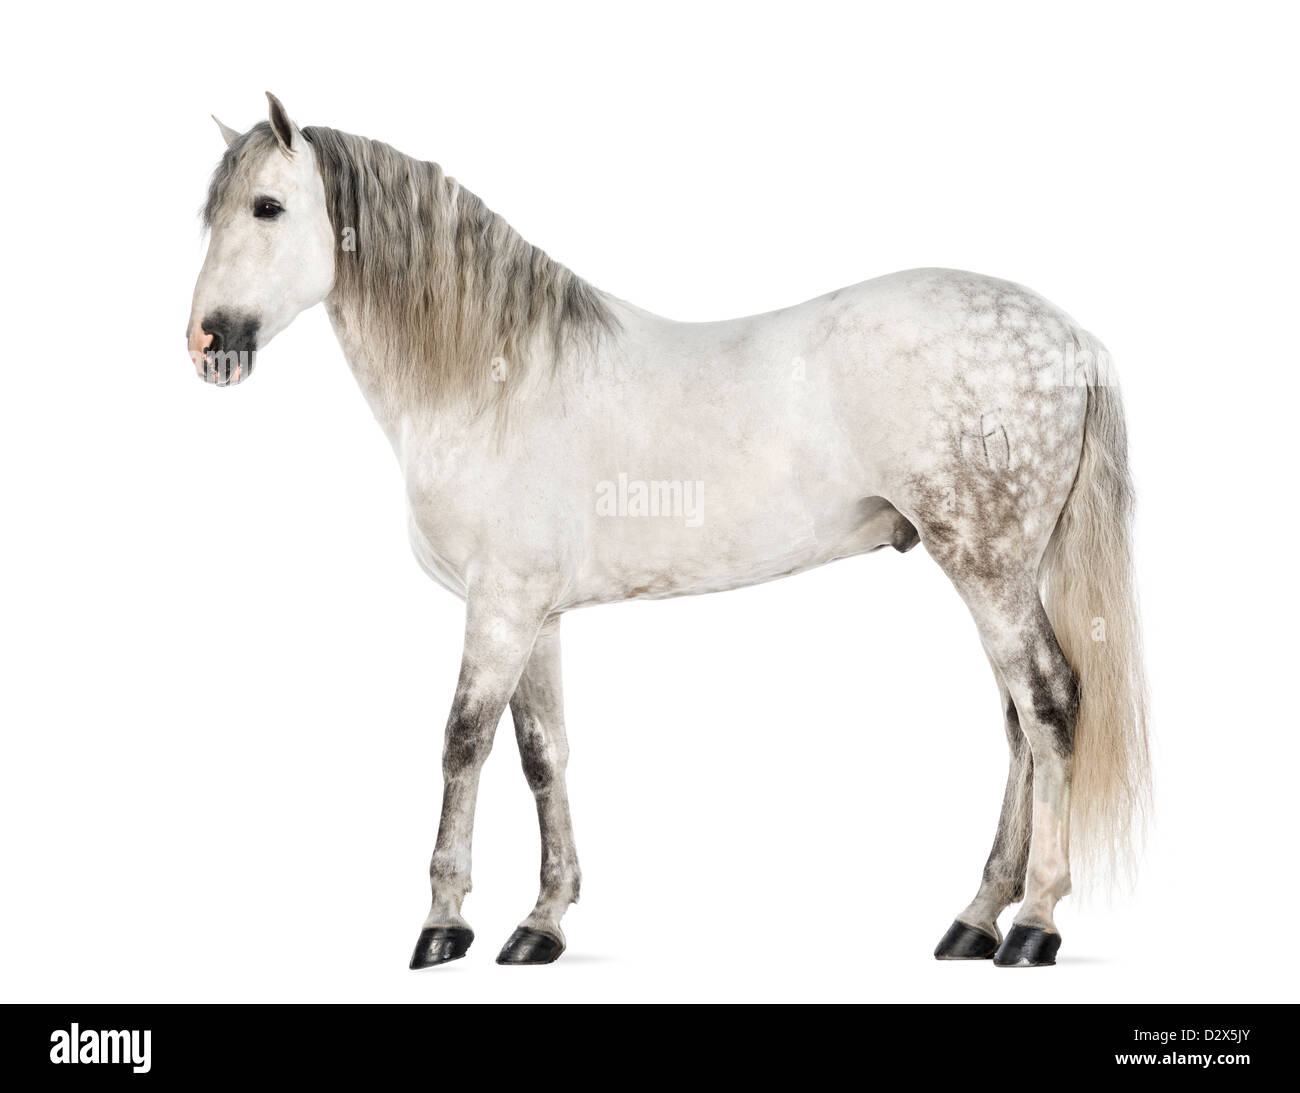 Male Andalusian, 7 years old, also known as the Pure Spanish Horse or PRE, standing against white background Stock Photo